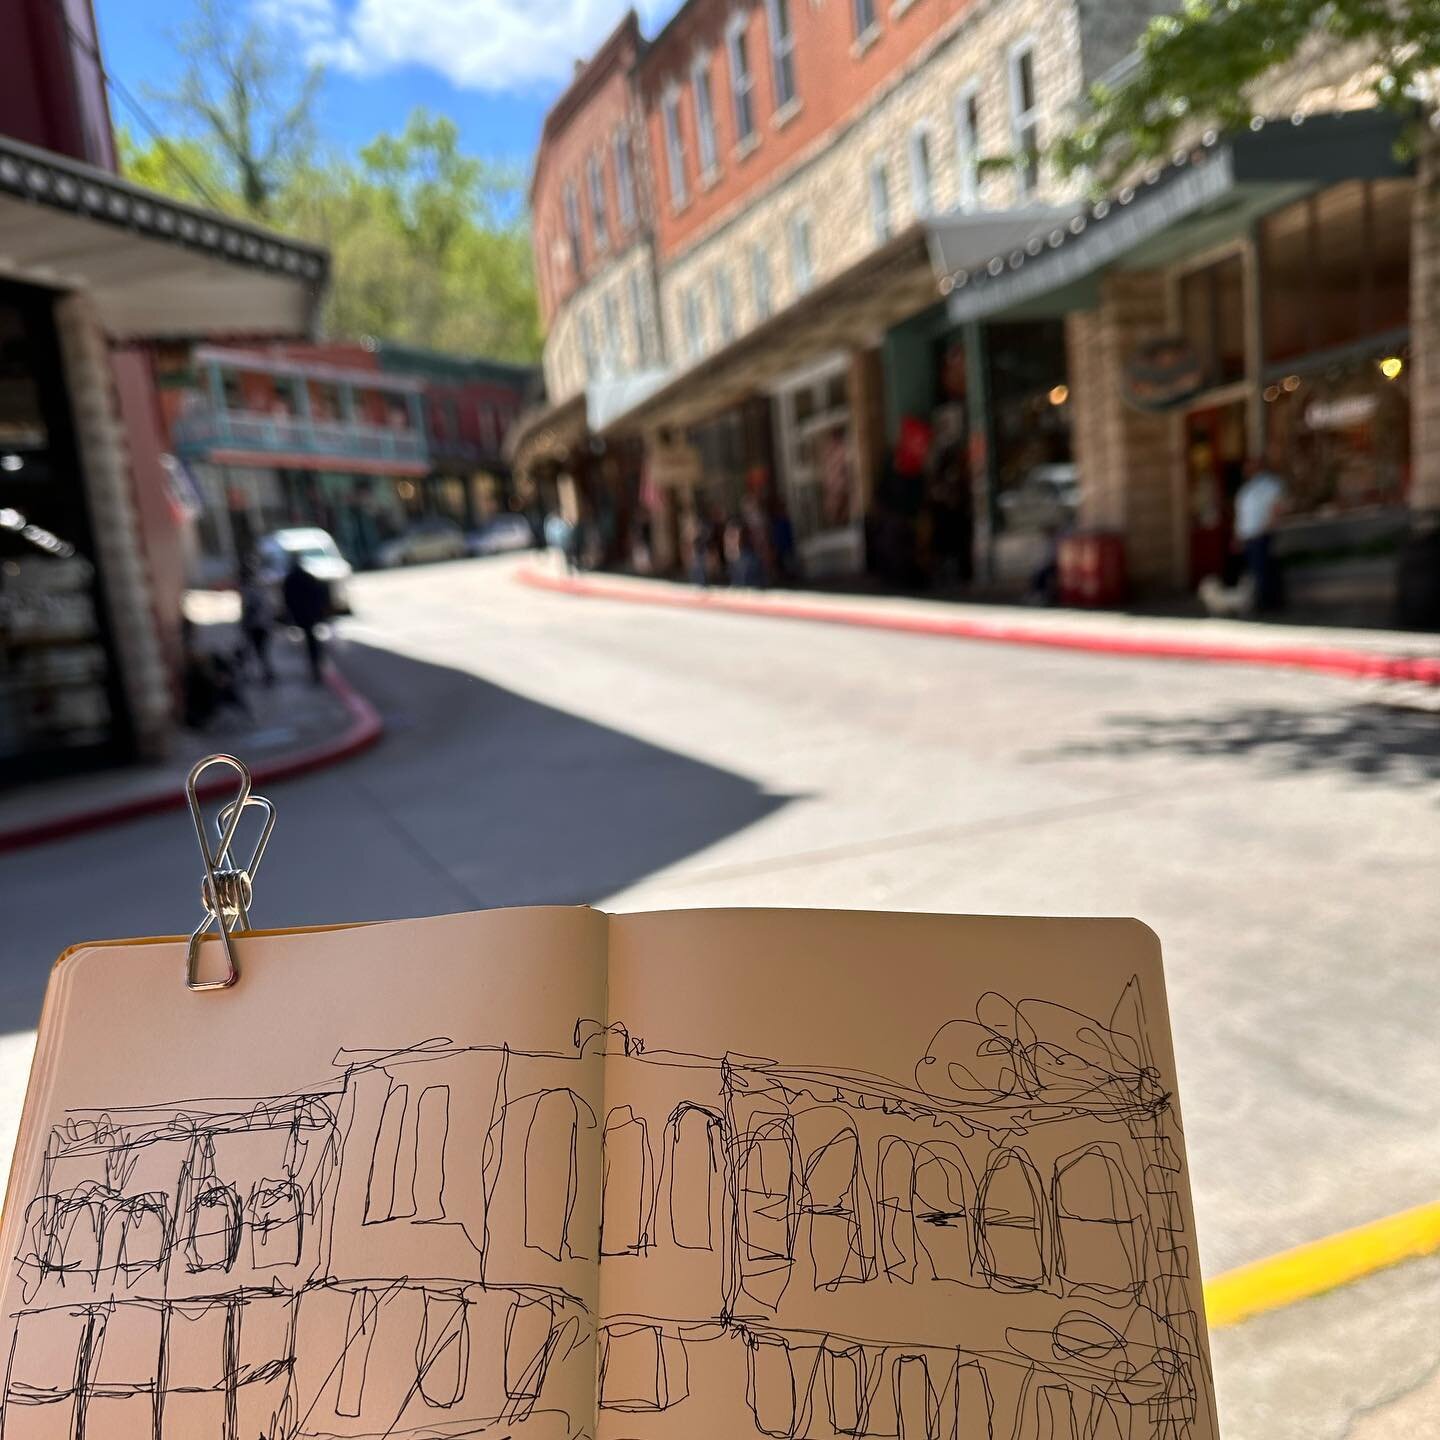 I was able to join the Urban Sketchers group in Downtown Eureka Springs that my Main Street Eureka Springs organization and Adventure Art sponsored yesterday. We drew for two hours tucked into a busy corner of our downtown. 

I ended the day doing a 